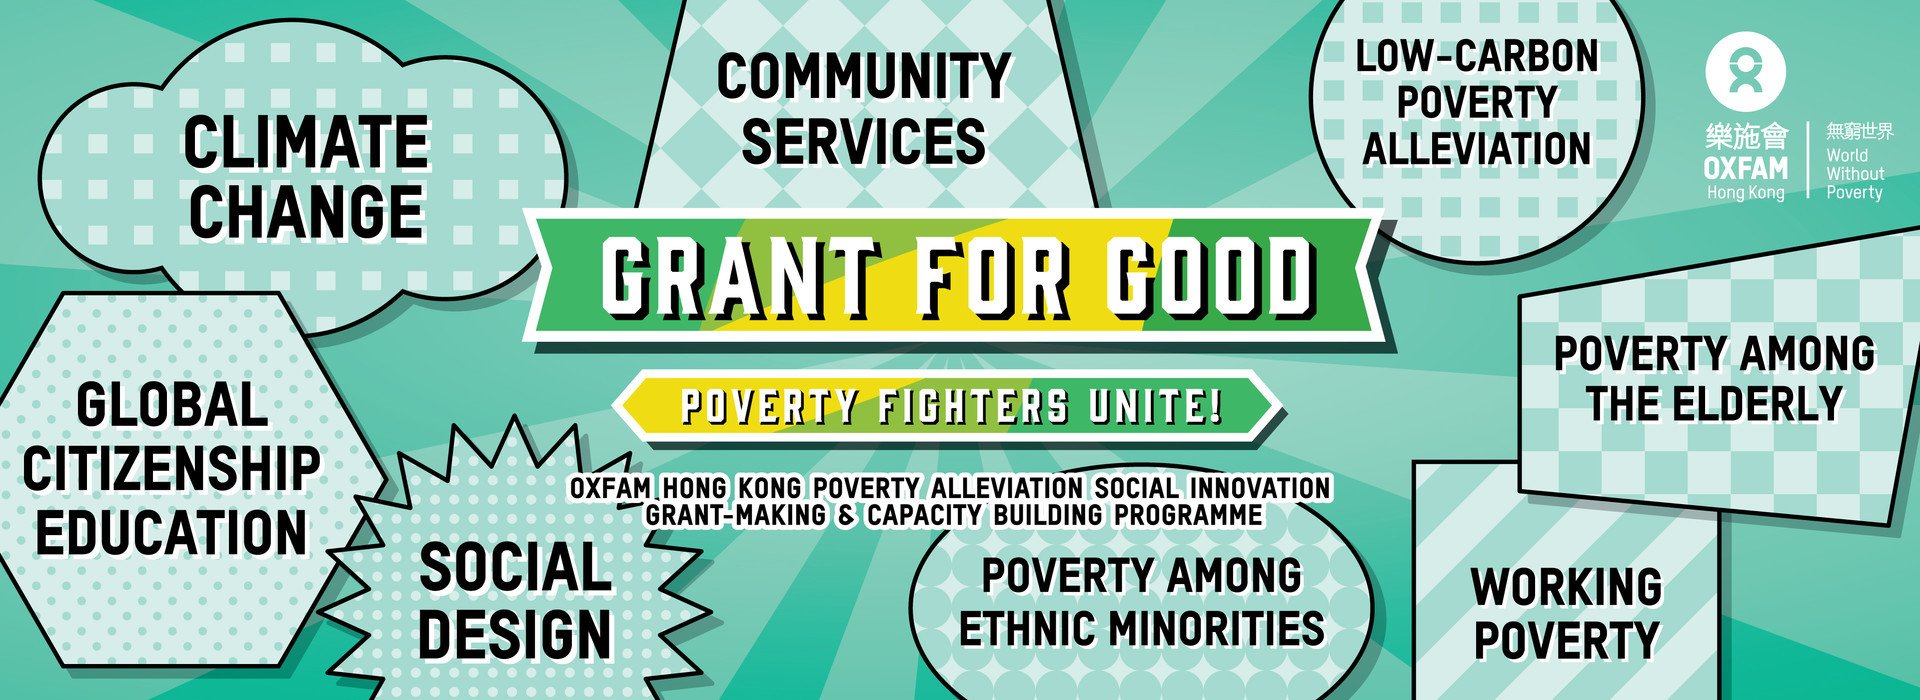 “Grant for Good” Oxfam Hong Kong Poverty Alleviation Social Innovation - Grant-making & Capacity Building Programme